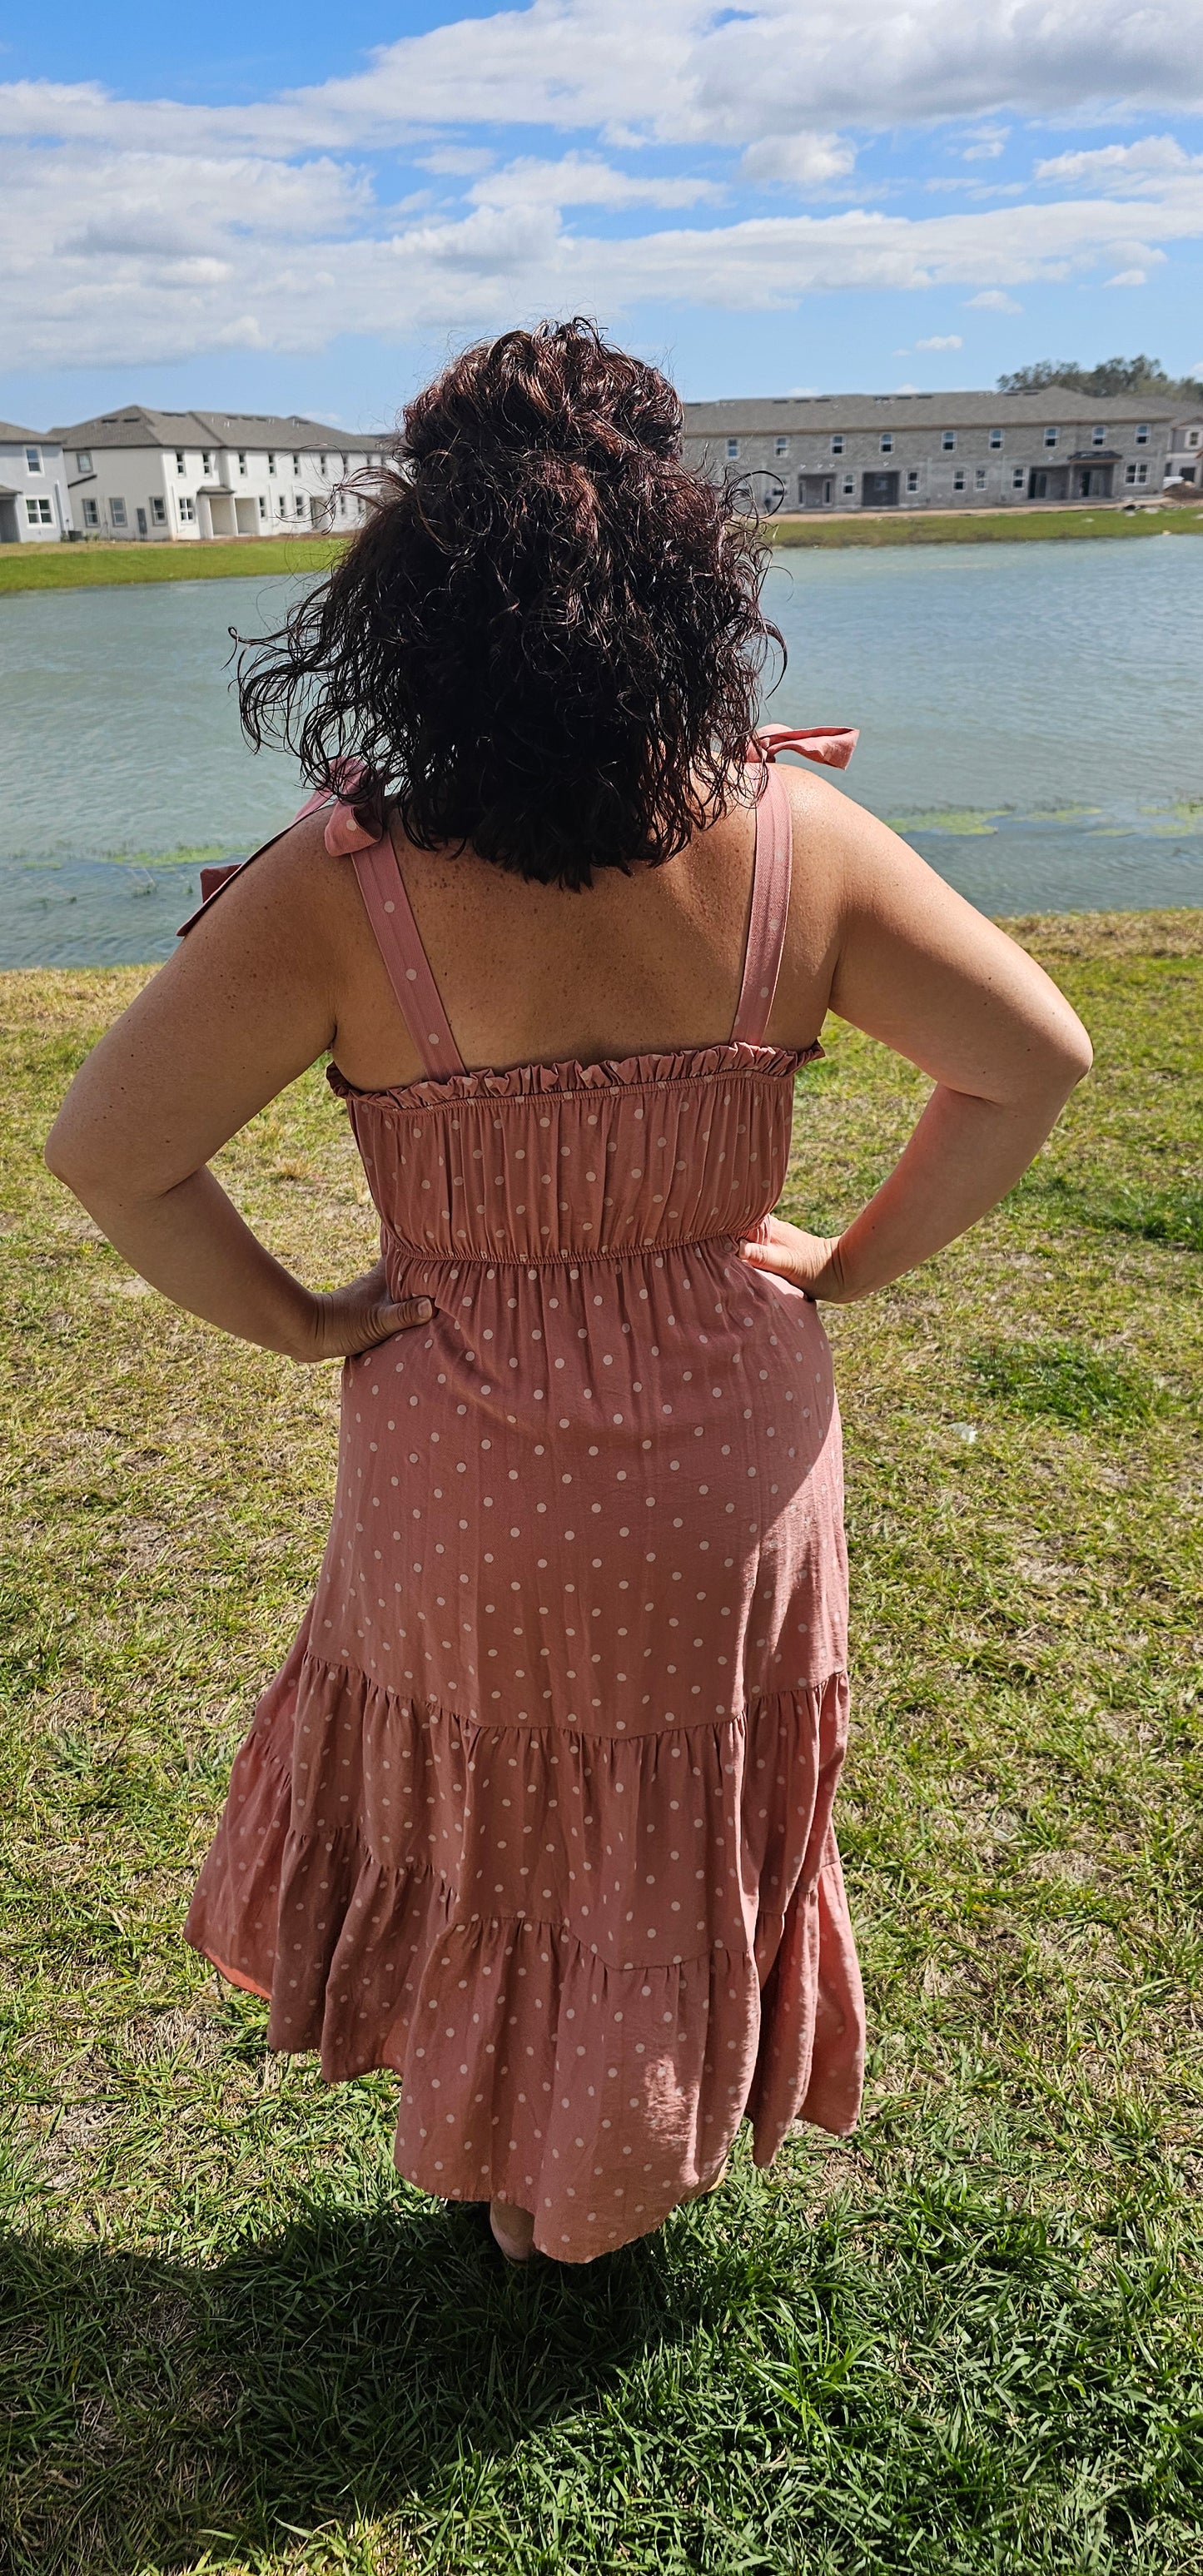 Look oh-so-stylish in this "Lily Dusty Rose Polka Dot" midi dress! With its square neckline, sleeveless design and tie straps, this dress is everything your summer wardrobe needs. The midi length and tiers give you the perfect shape for any occasion. Let the fun begin! Sizes small through large.